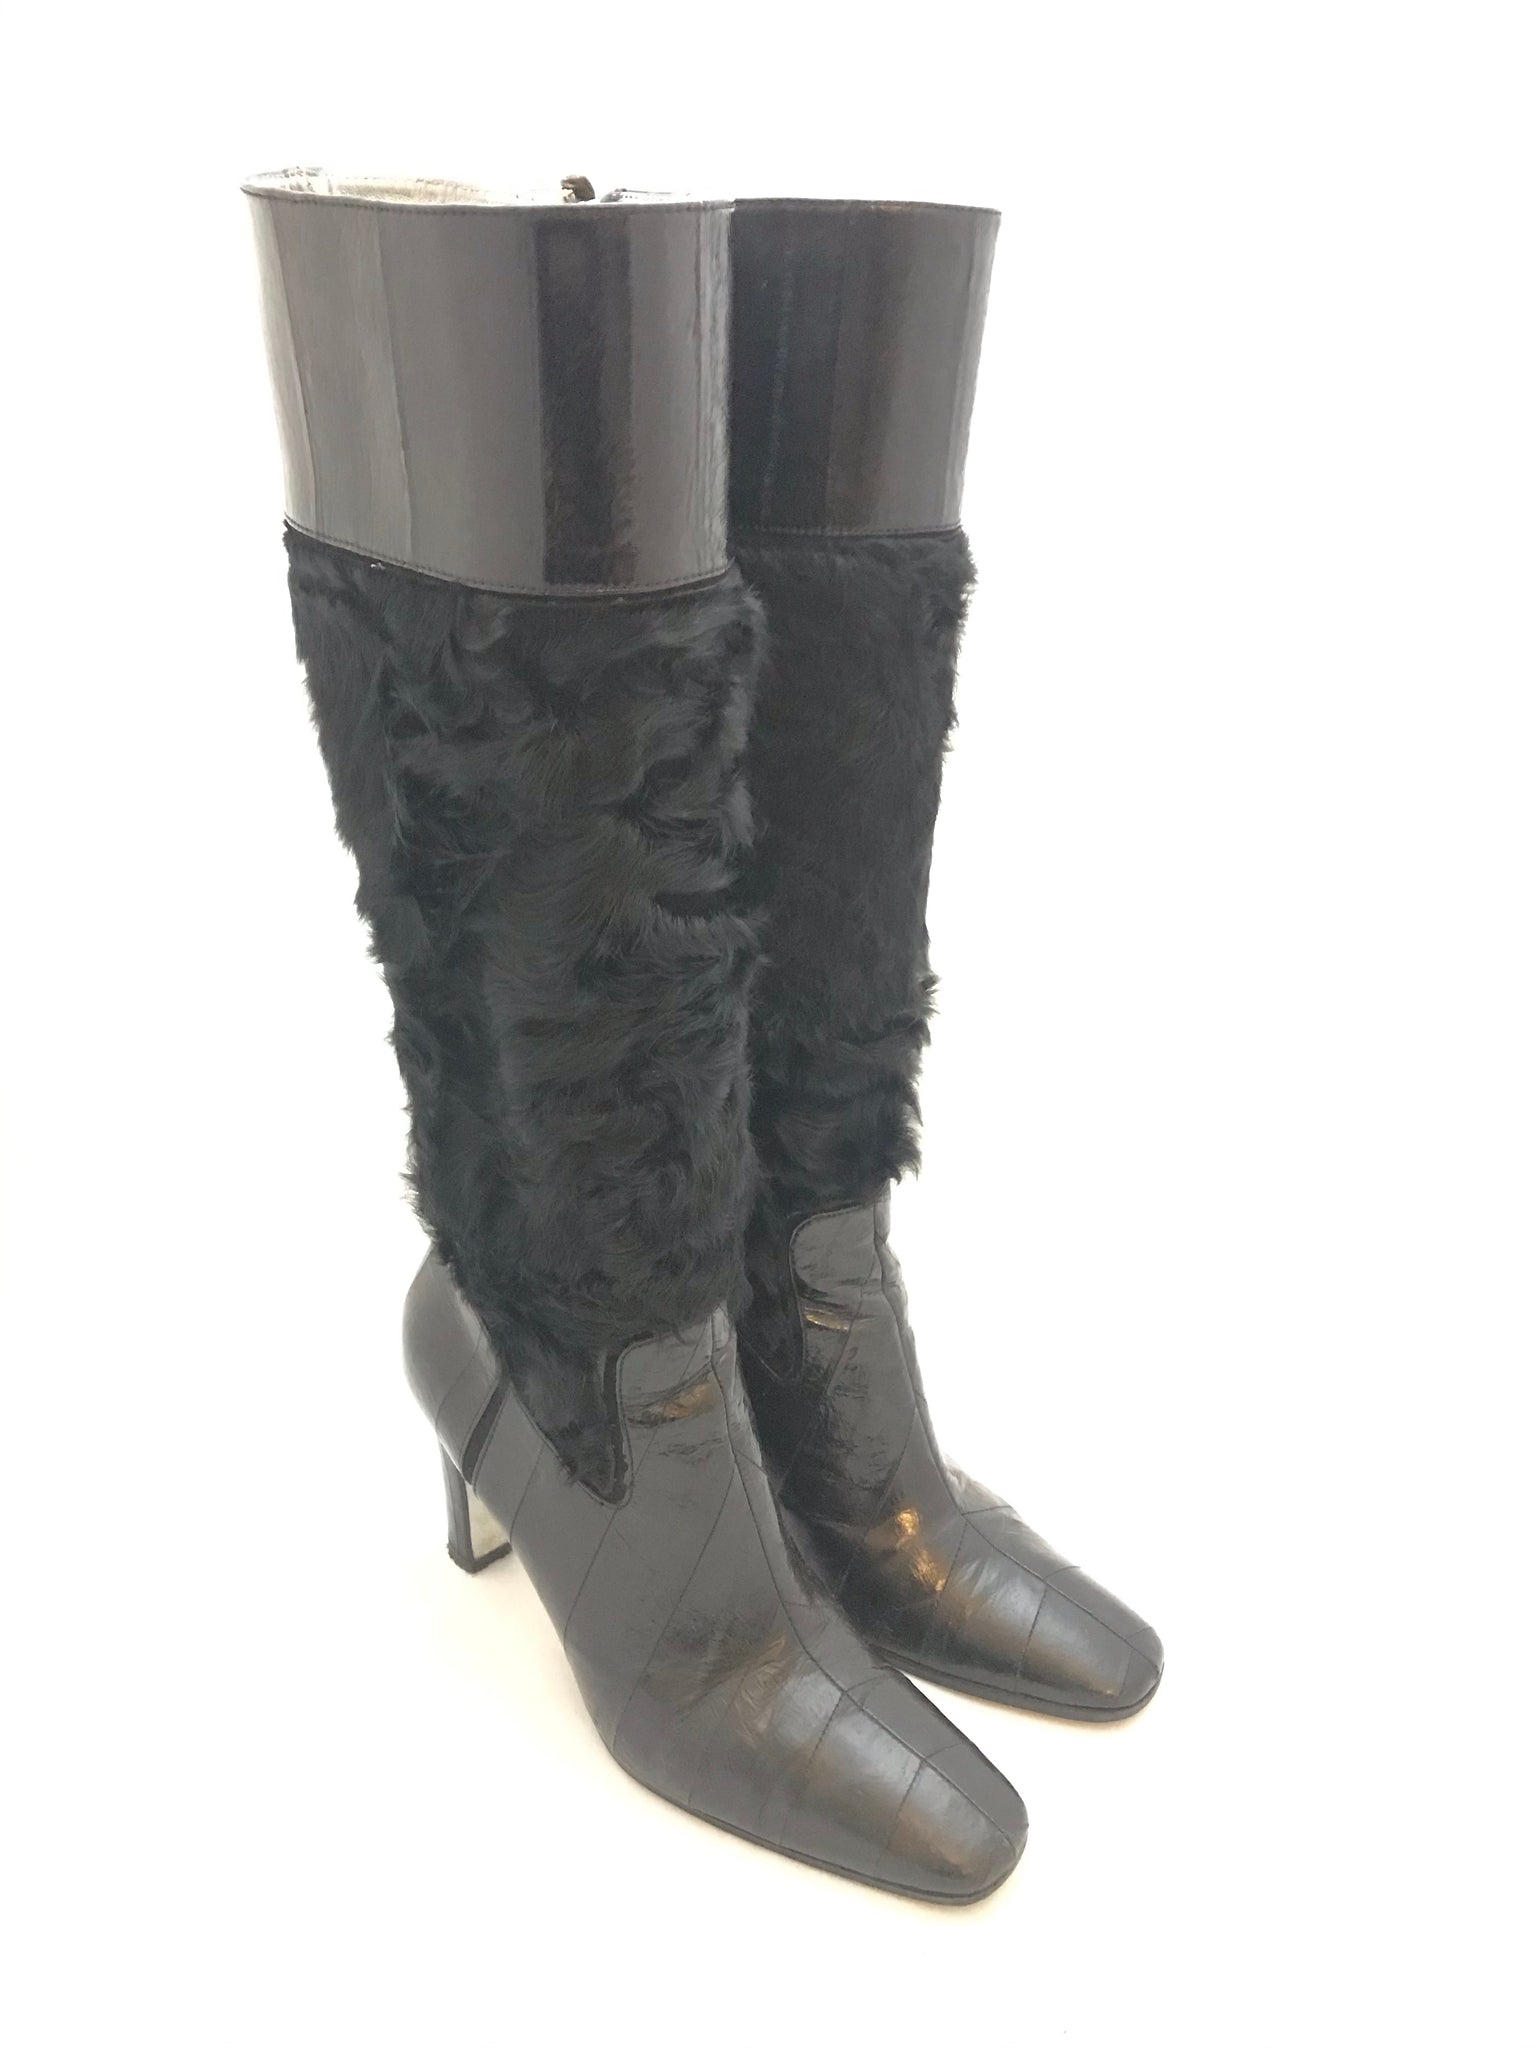 Isabella's Wardrobe Dolce & Gabbana Leather and Fur Knee High Boots.